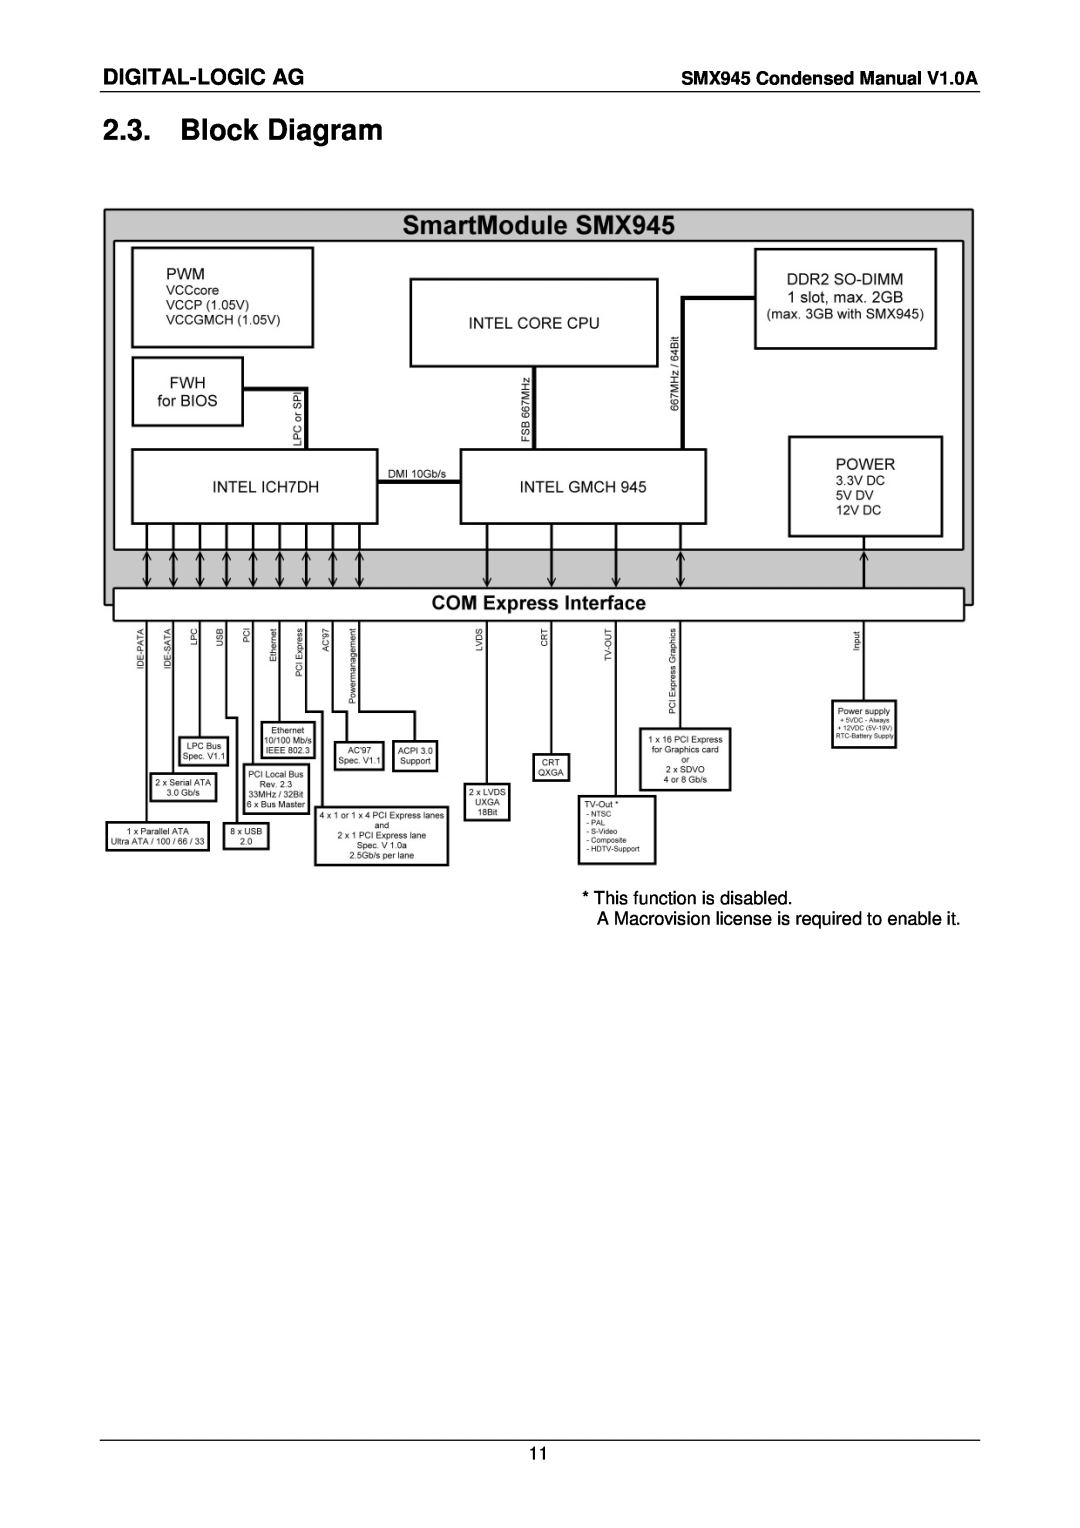 Compaq SMX945 Block Diagram, Digital-Logic Ag, This function is disabled, A Macrovision license is required to enable it 